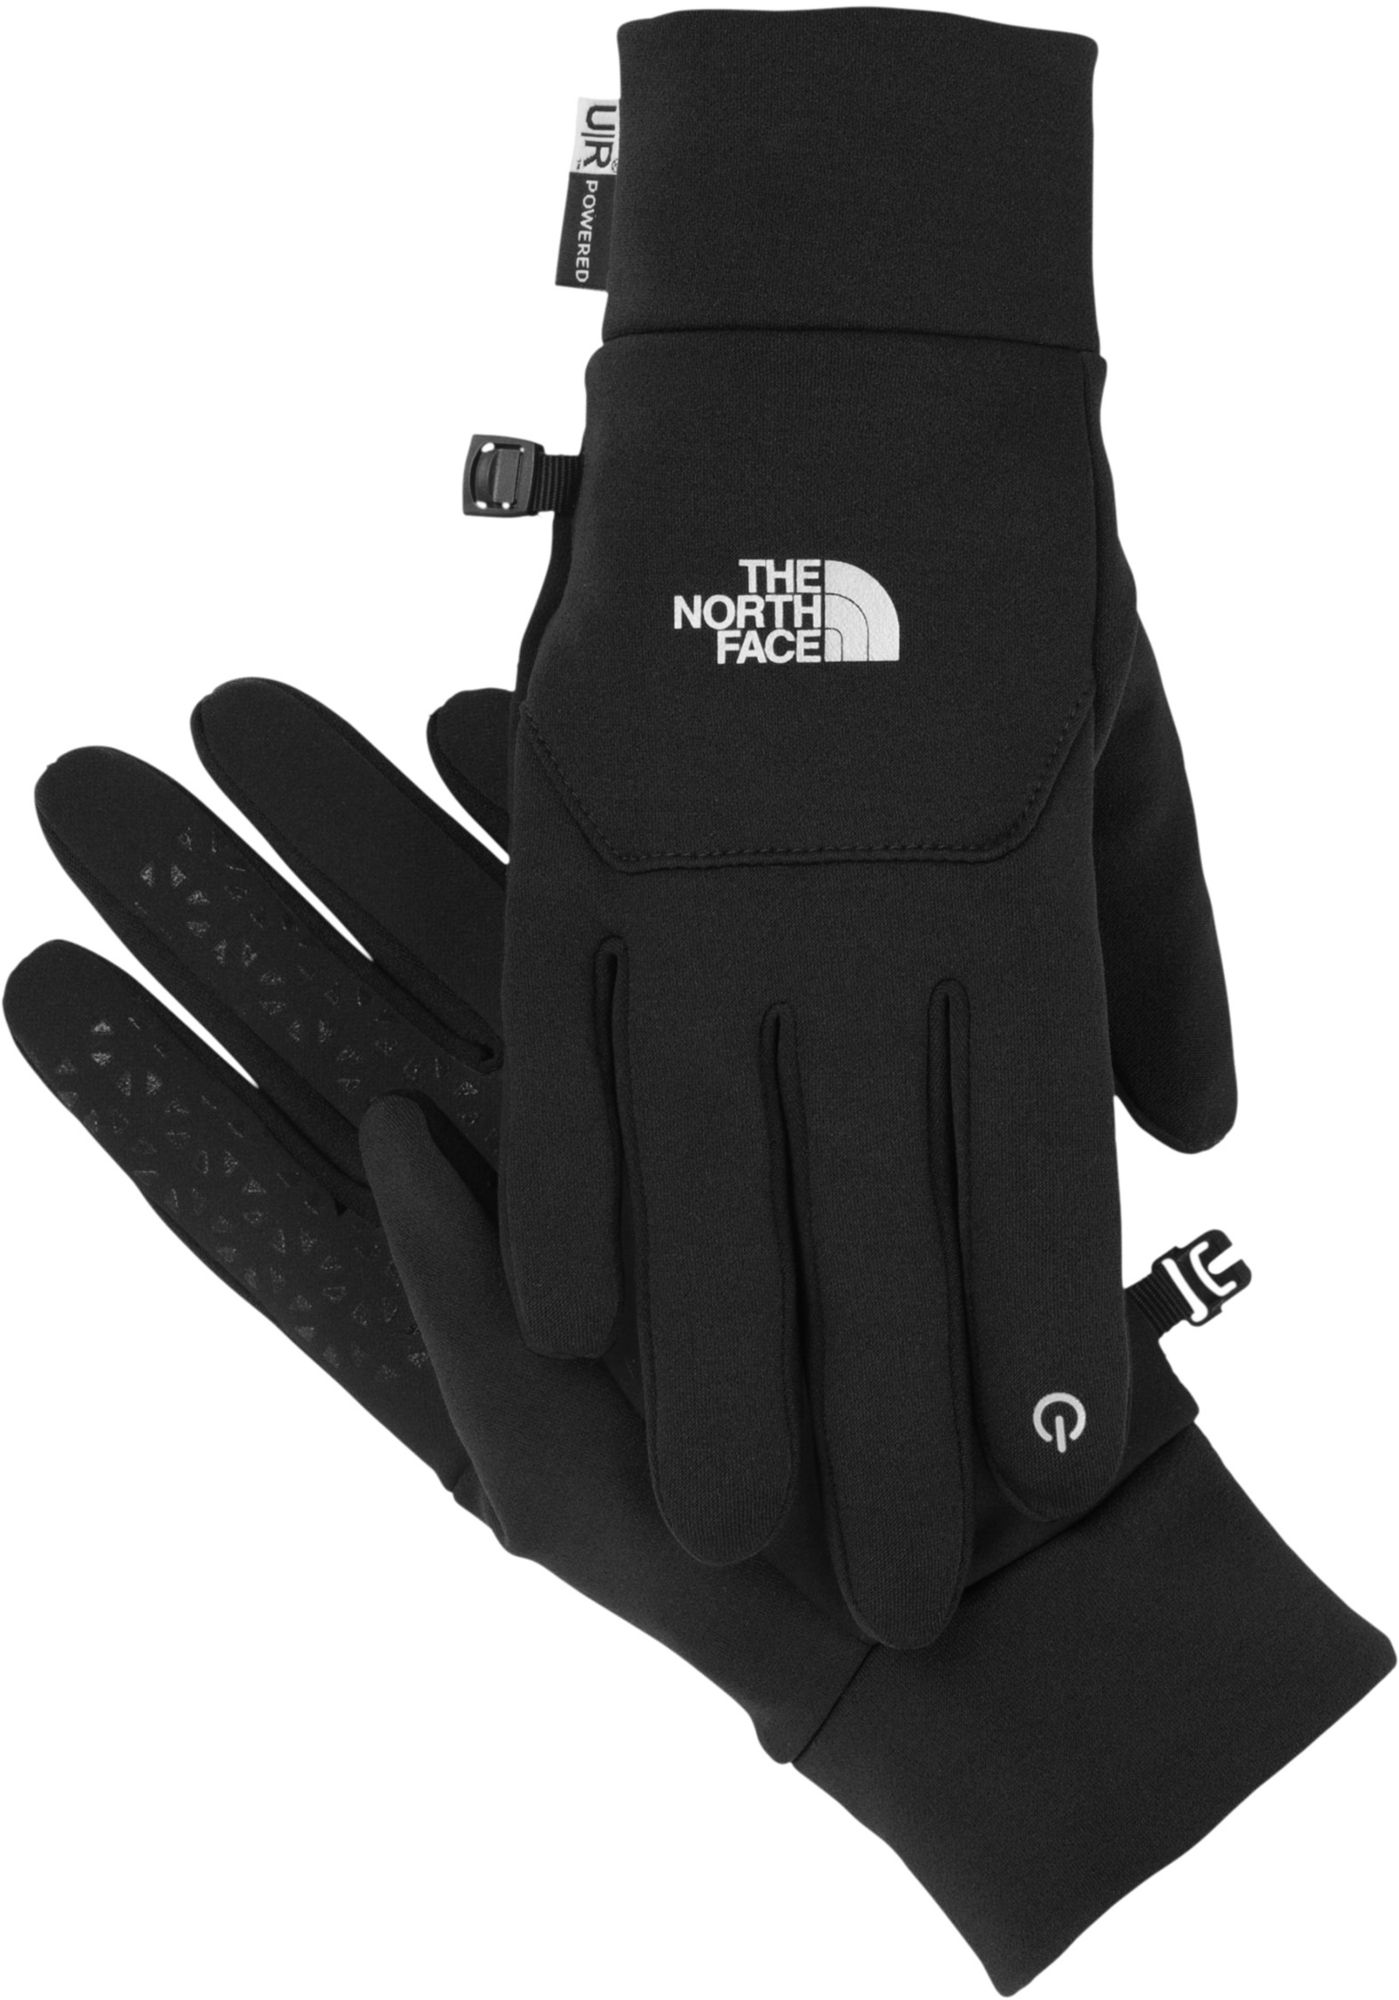 the north face men's gloves